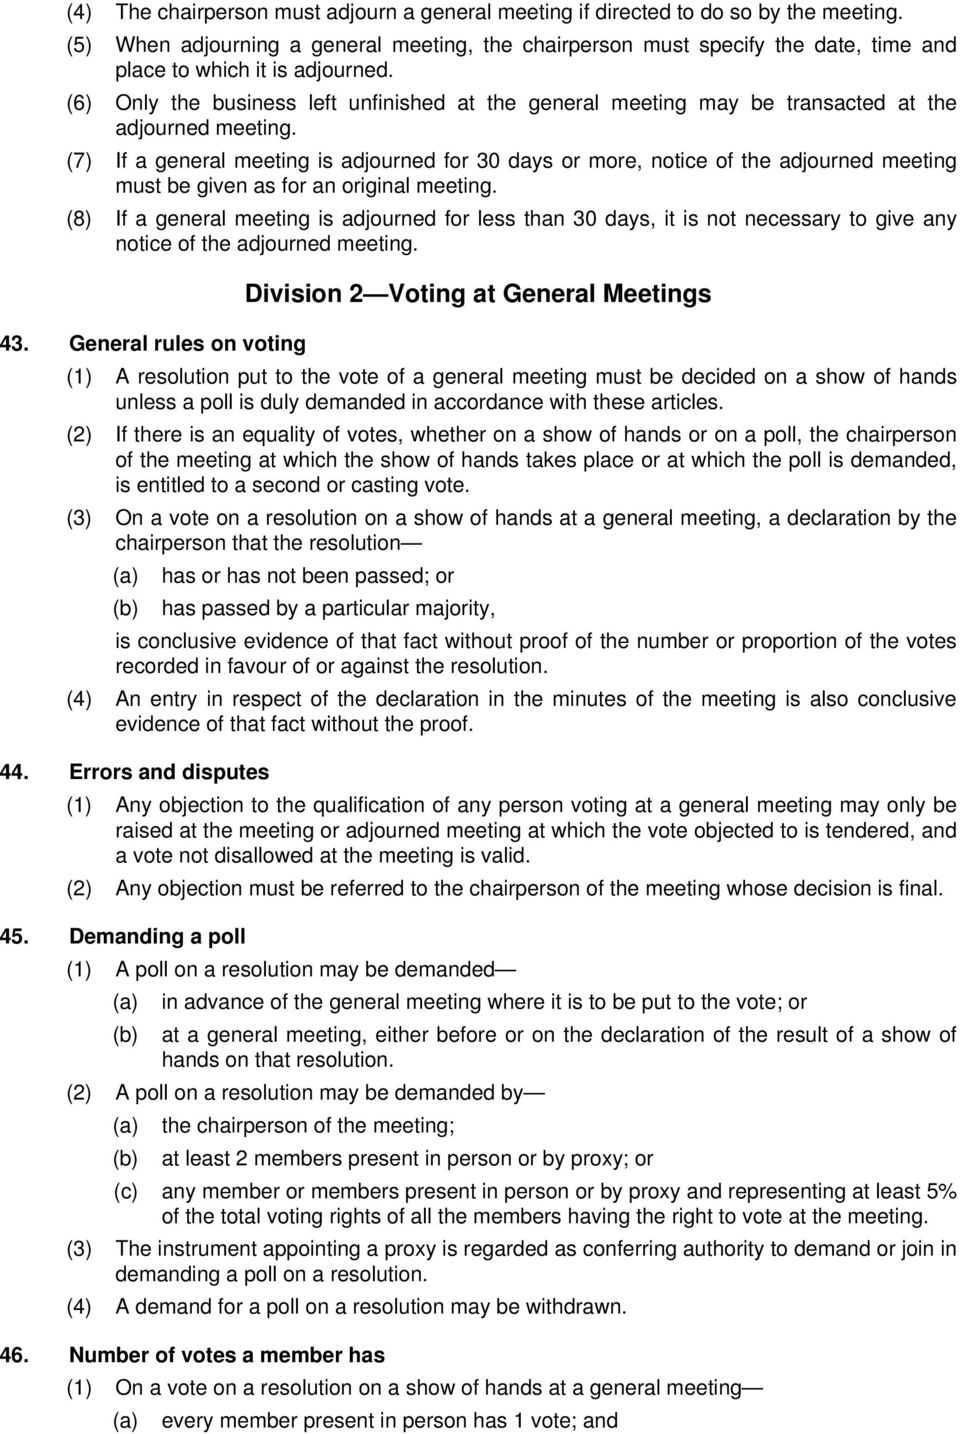 (6) Only the business left unfinished at the general meeting may be transacted at the adjourned meeting.